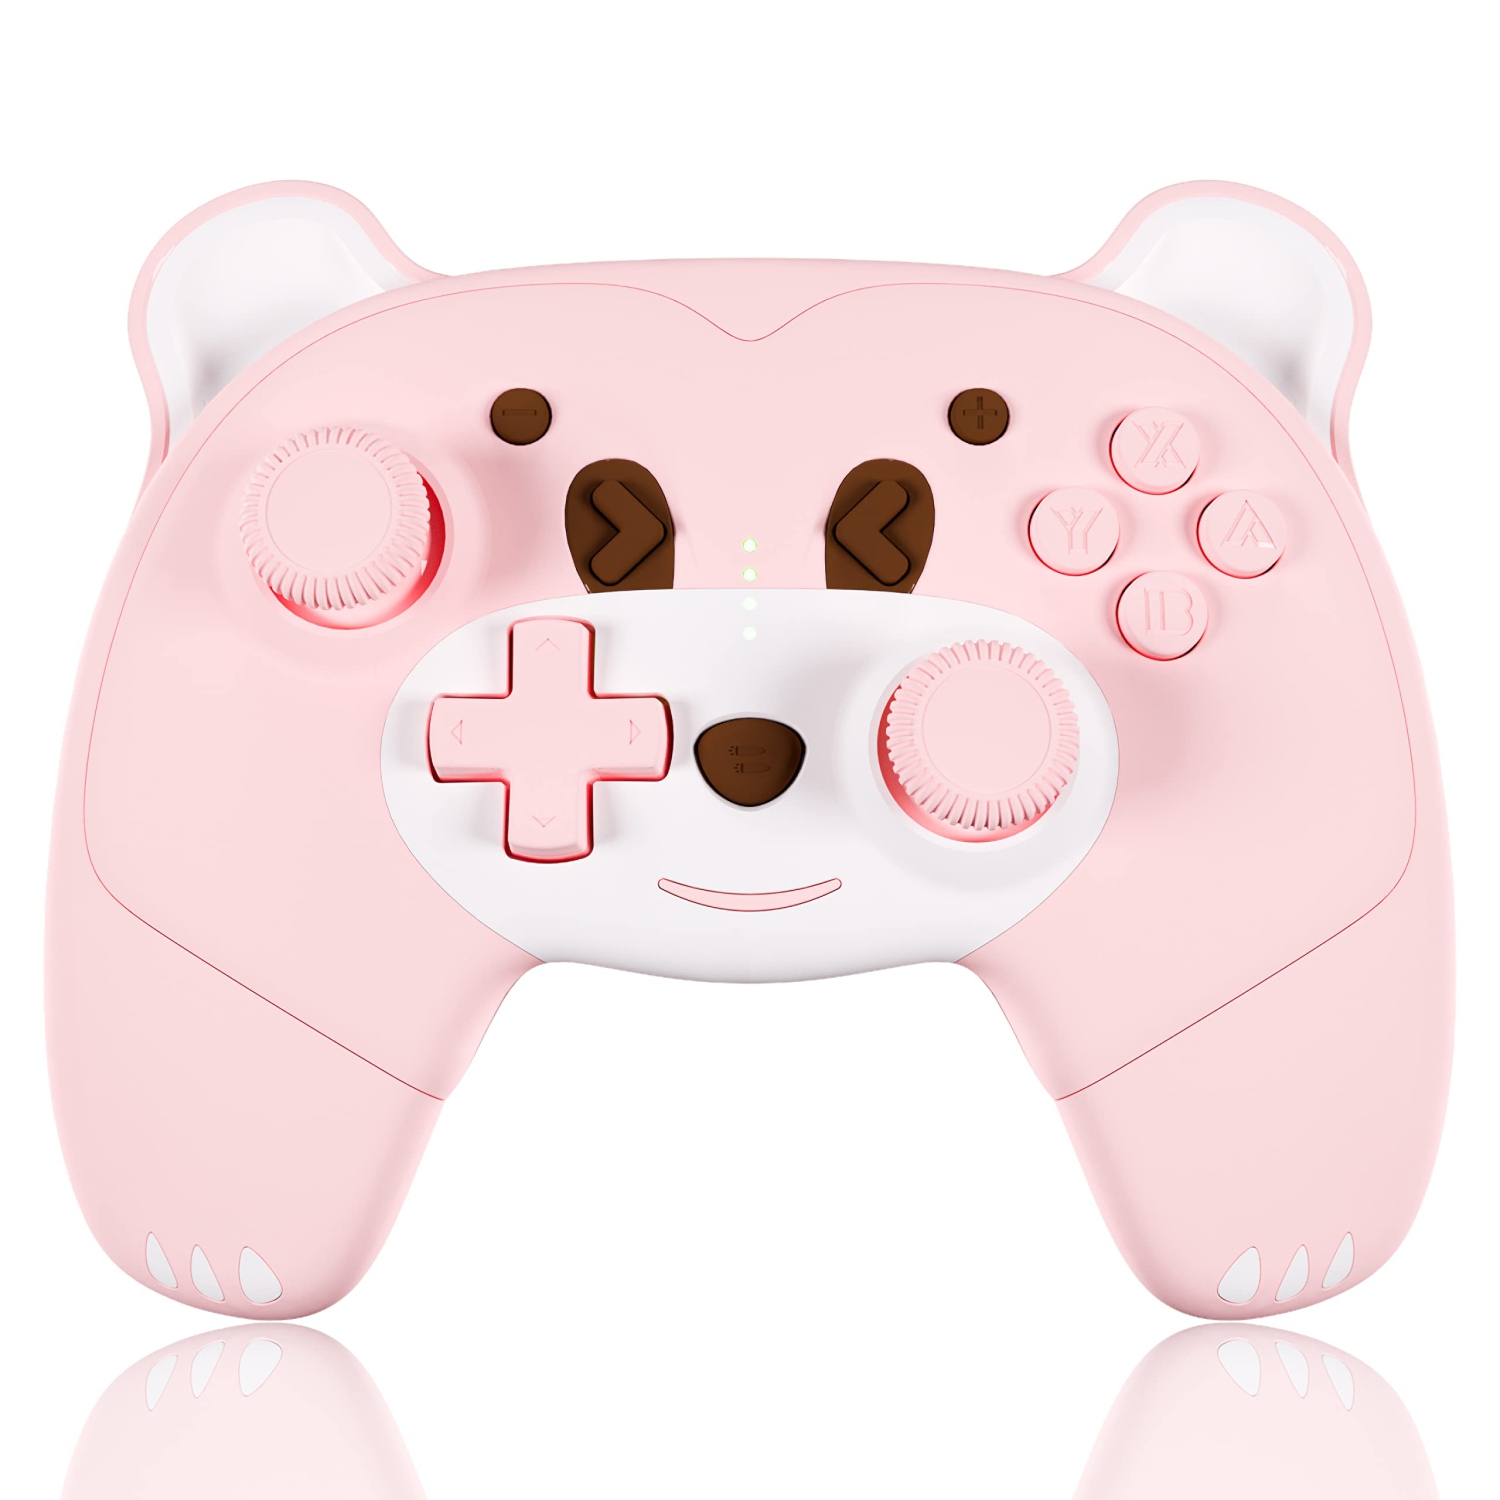 Wireless Switch Pro Controller Compatible with Nintendo Switch/Lite/OLED, Wireless Pro Controller with Headphone Jack, Support Macro Wake-Up Turbo Dual Vibration 6-Axis, Cute Pink